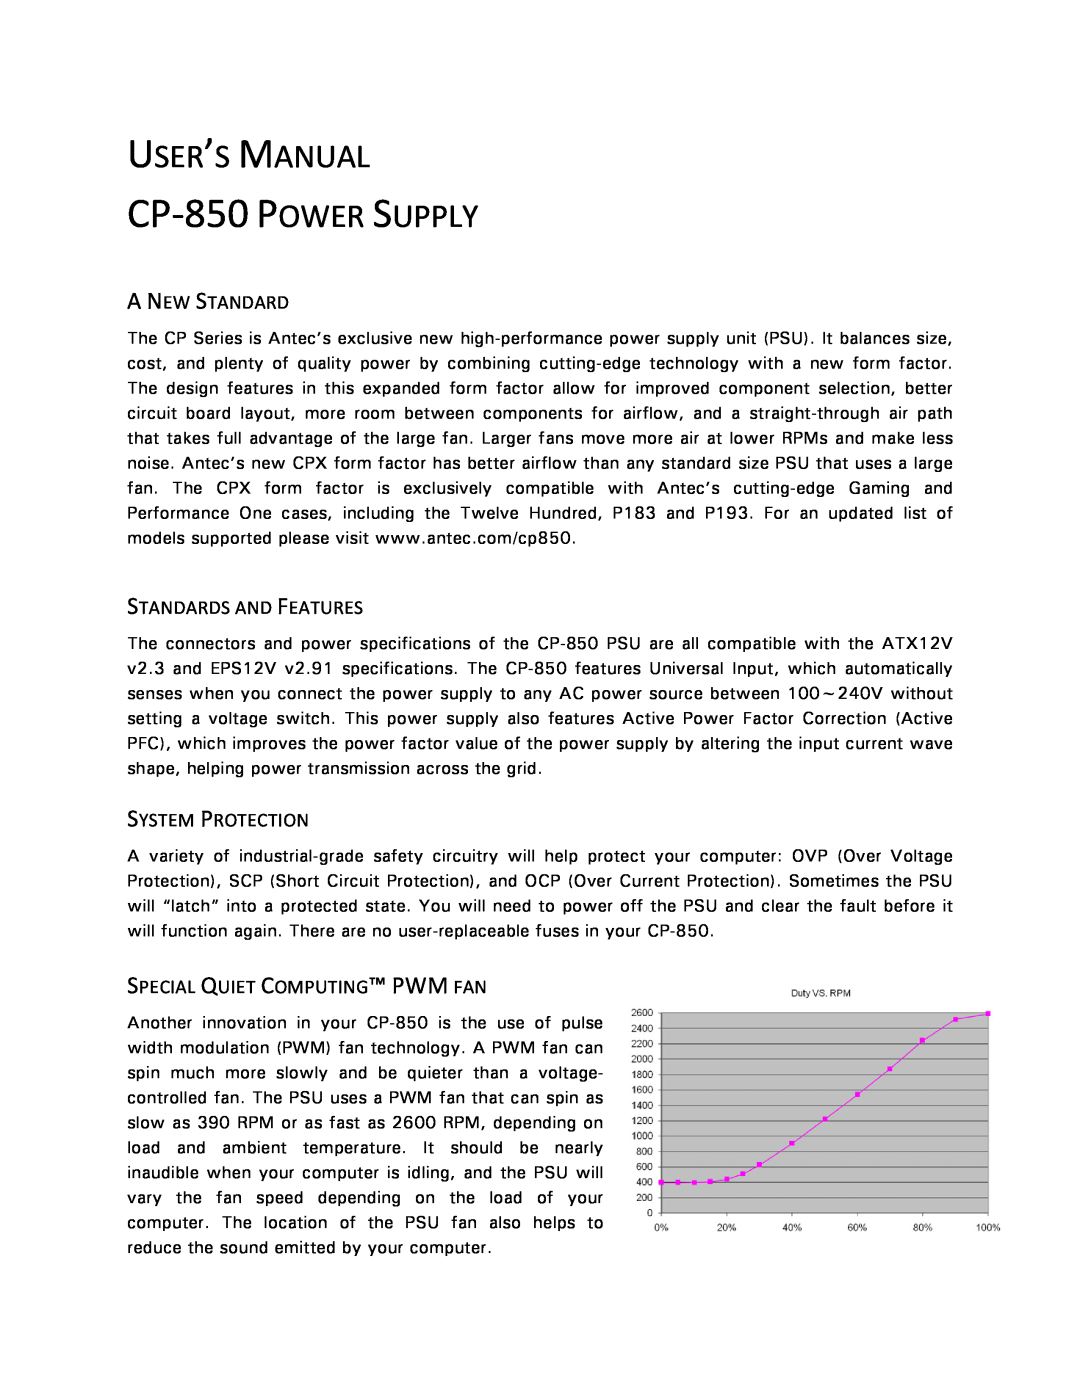 Antec user manual USER’S MANUAL CP-850 POWER SUPPLY, A New Standard, Standards And Features, System Protection 